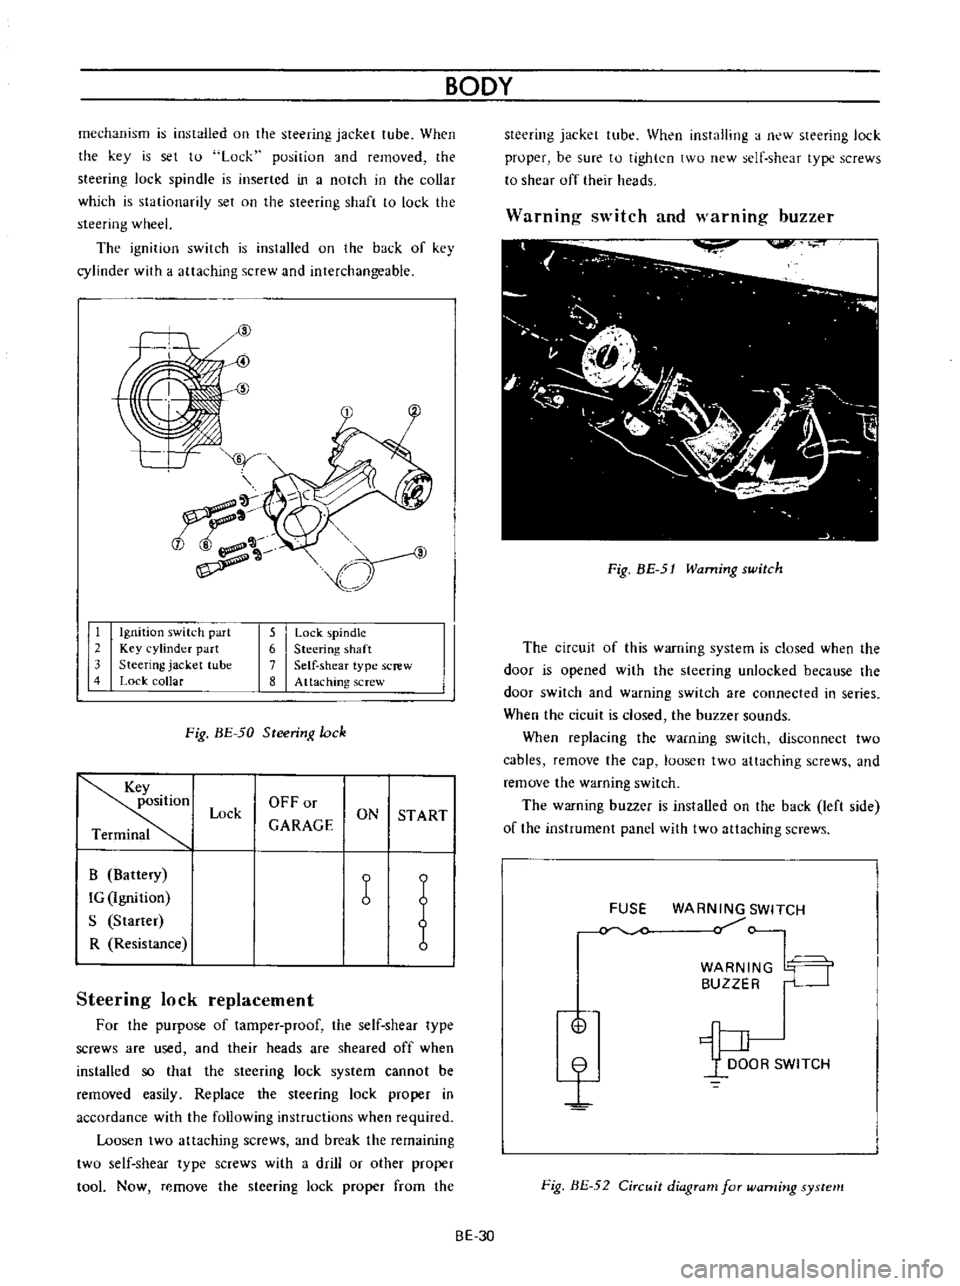 DATSUN B110 1973  Service Repair Manual 
mechanism 
is 
installed 
on 
the

steering 
jacket 
tube 
When

the

key 
is 
set 
to

Lock

position 
and

removed 
the

steering 
lock

spindle 
is

inserted 
in 
a 
notch 
in

the 
collar

which
